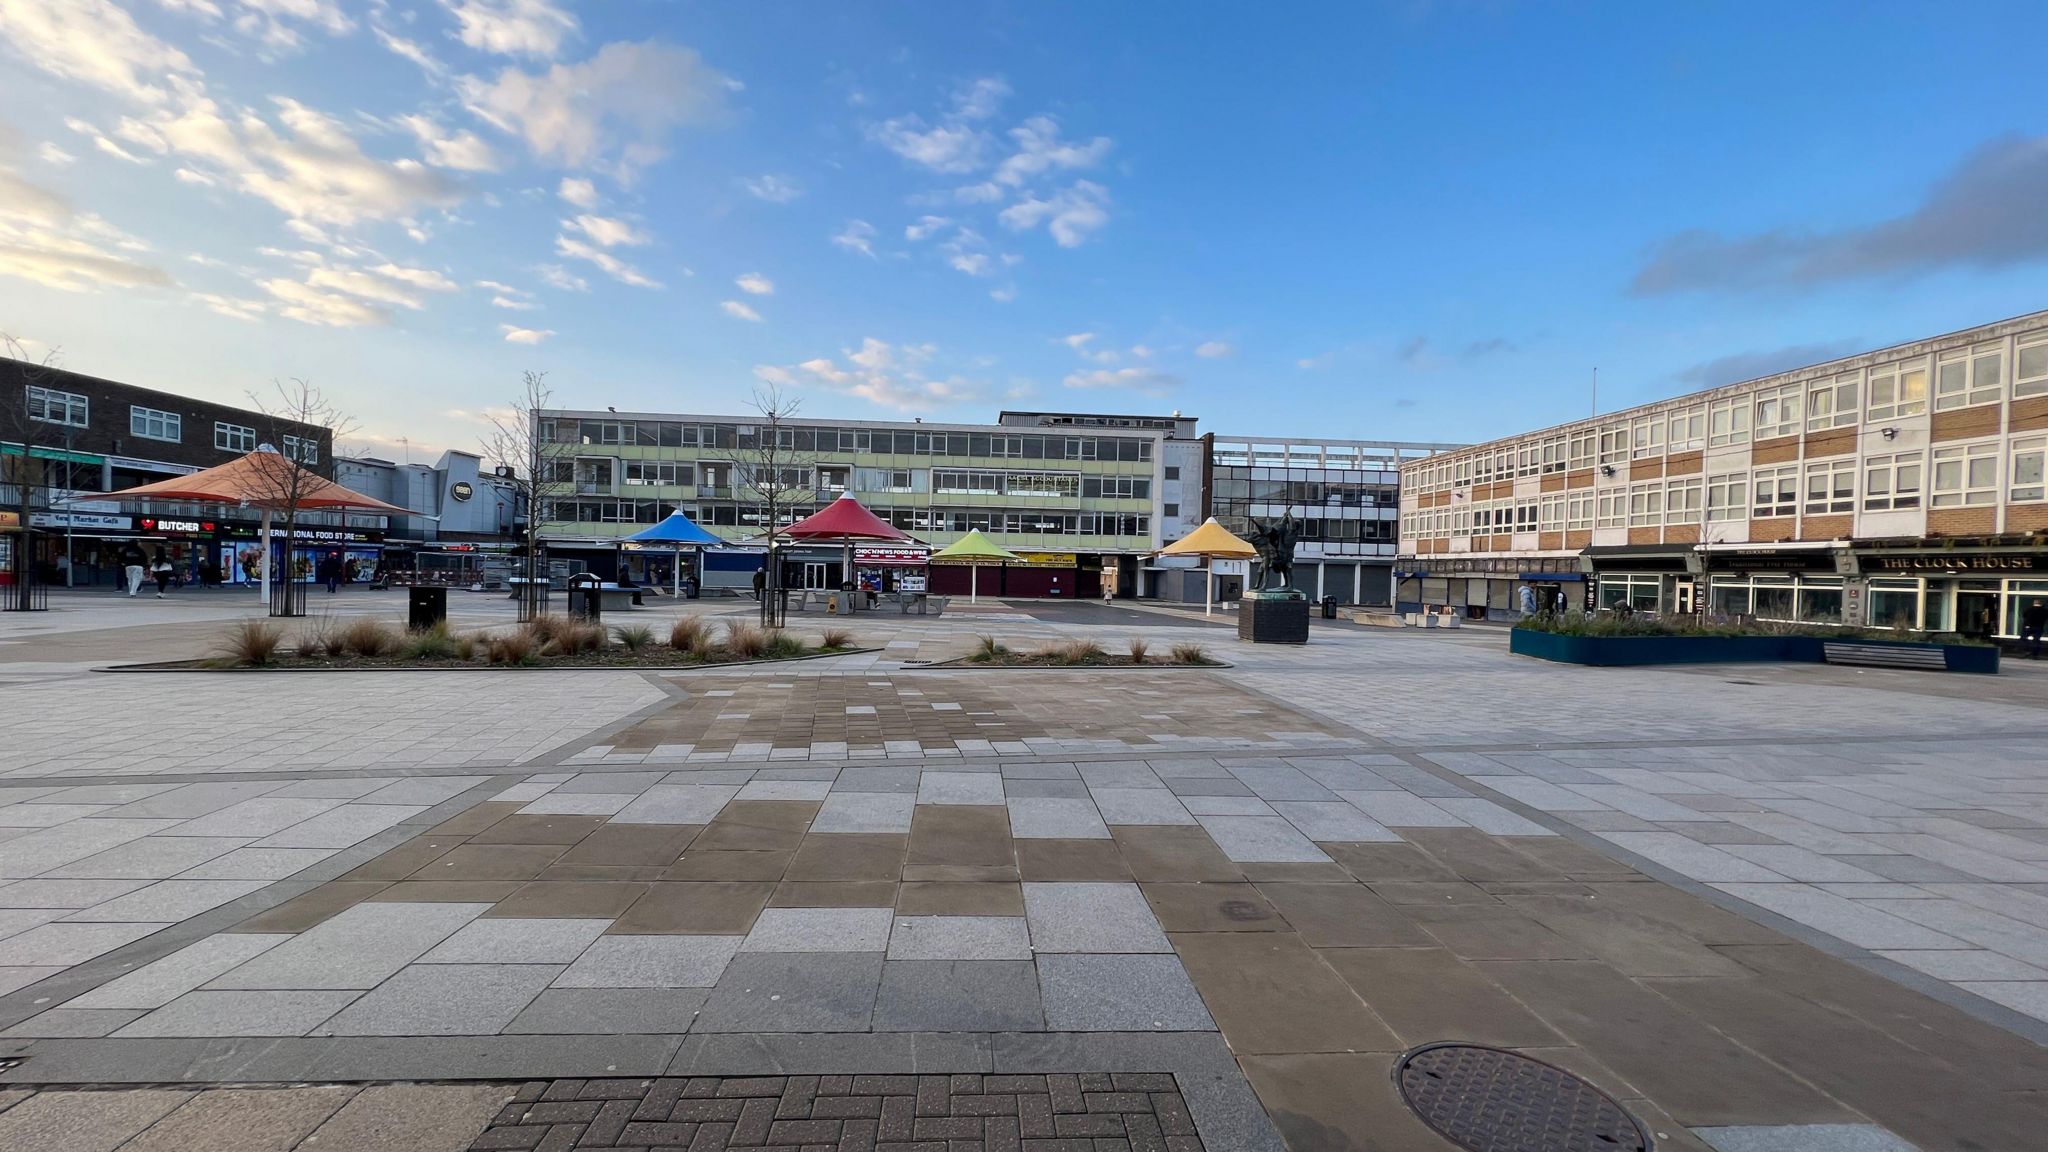 The empty looking Market Square in Harlow